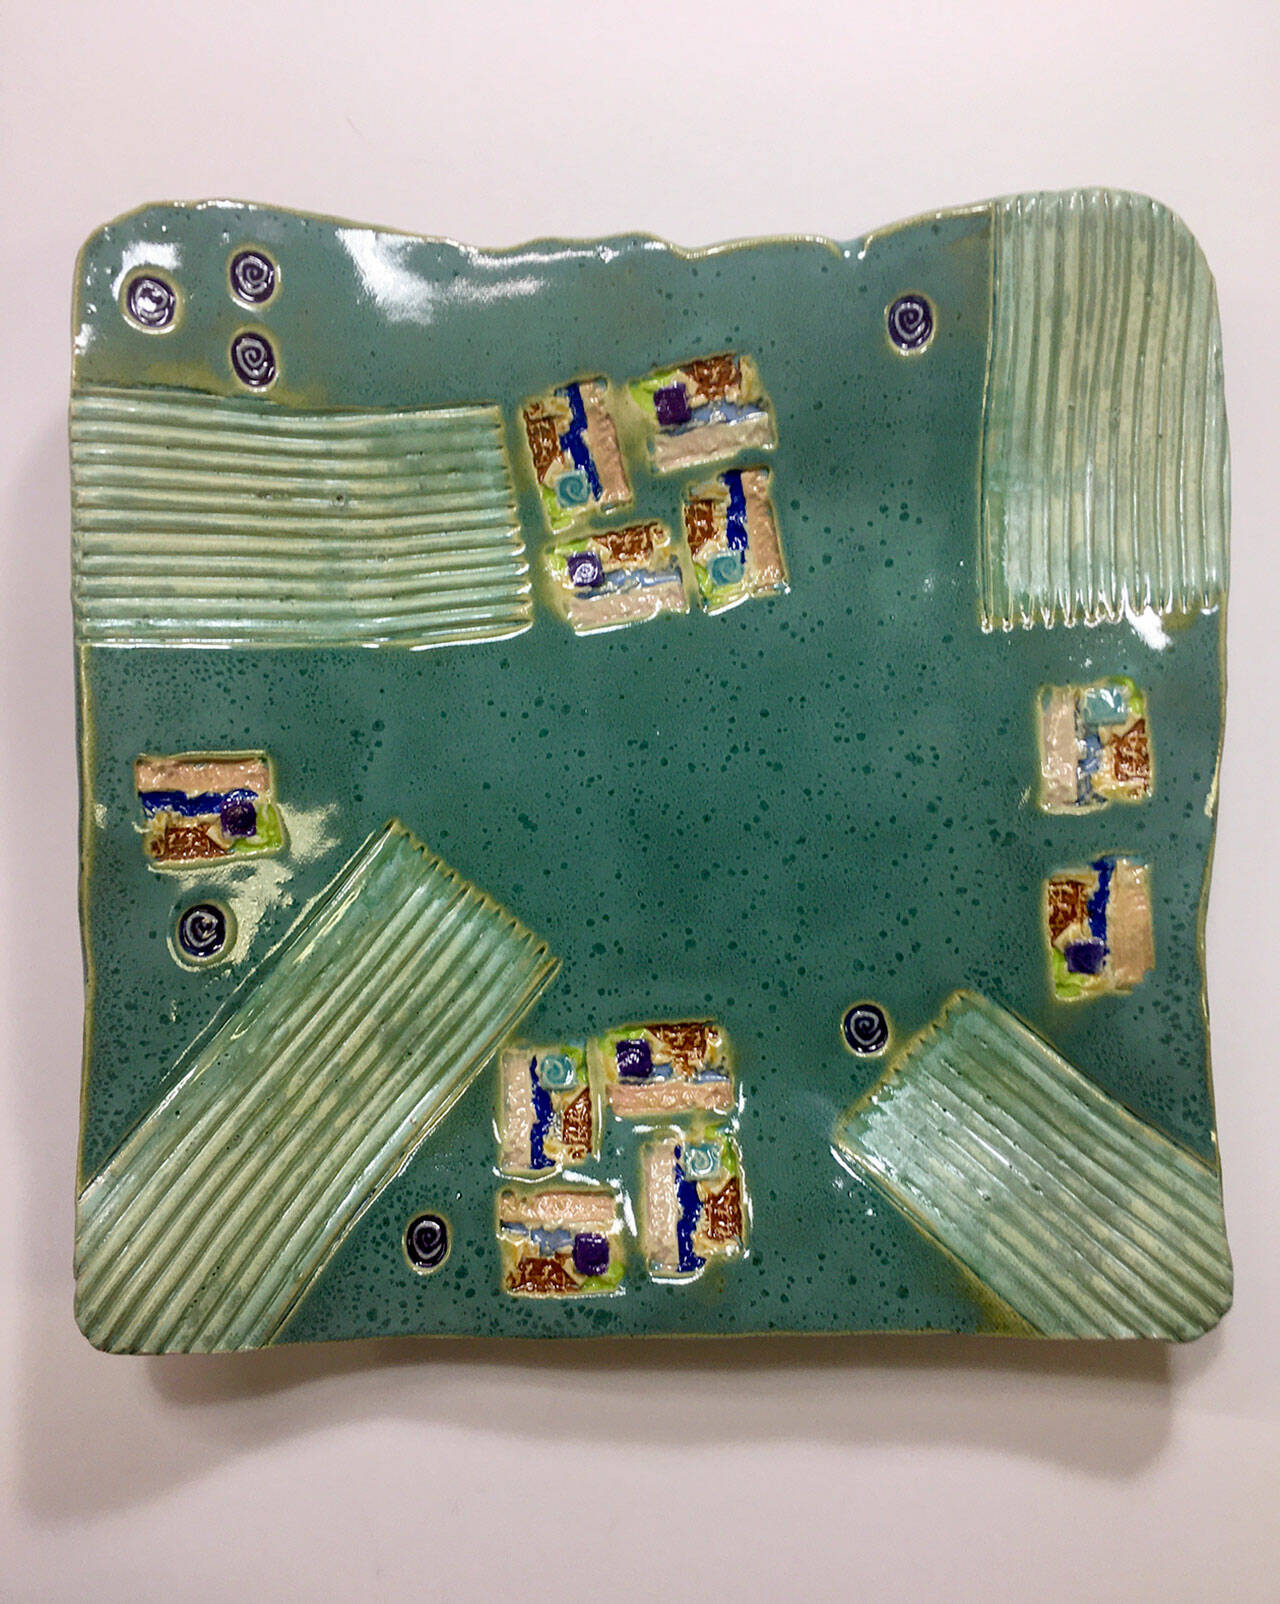 Functional ceramics, like this plate, created by Barbara Ewing are exhibited at Port Townsend Gallery.